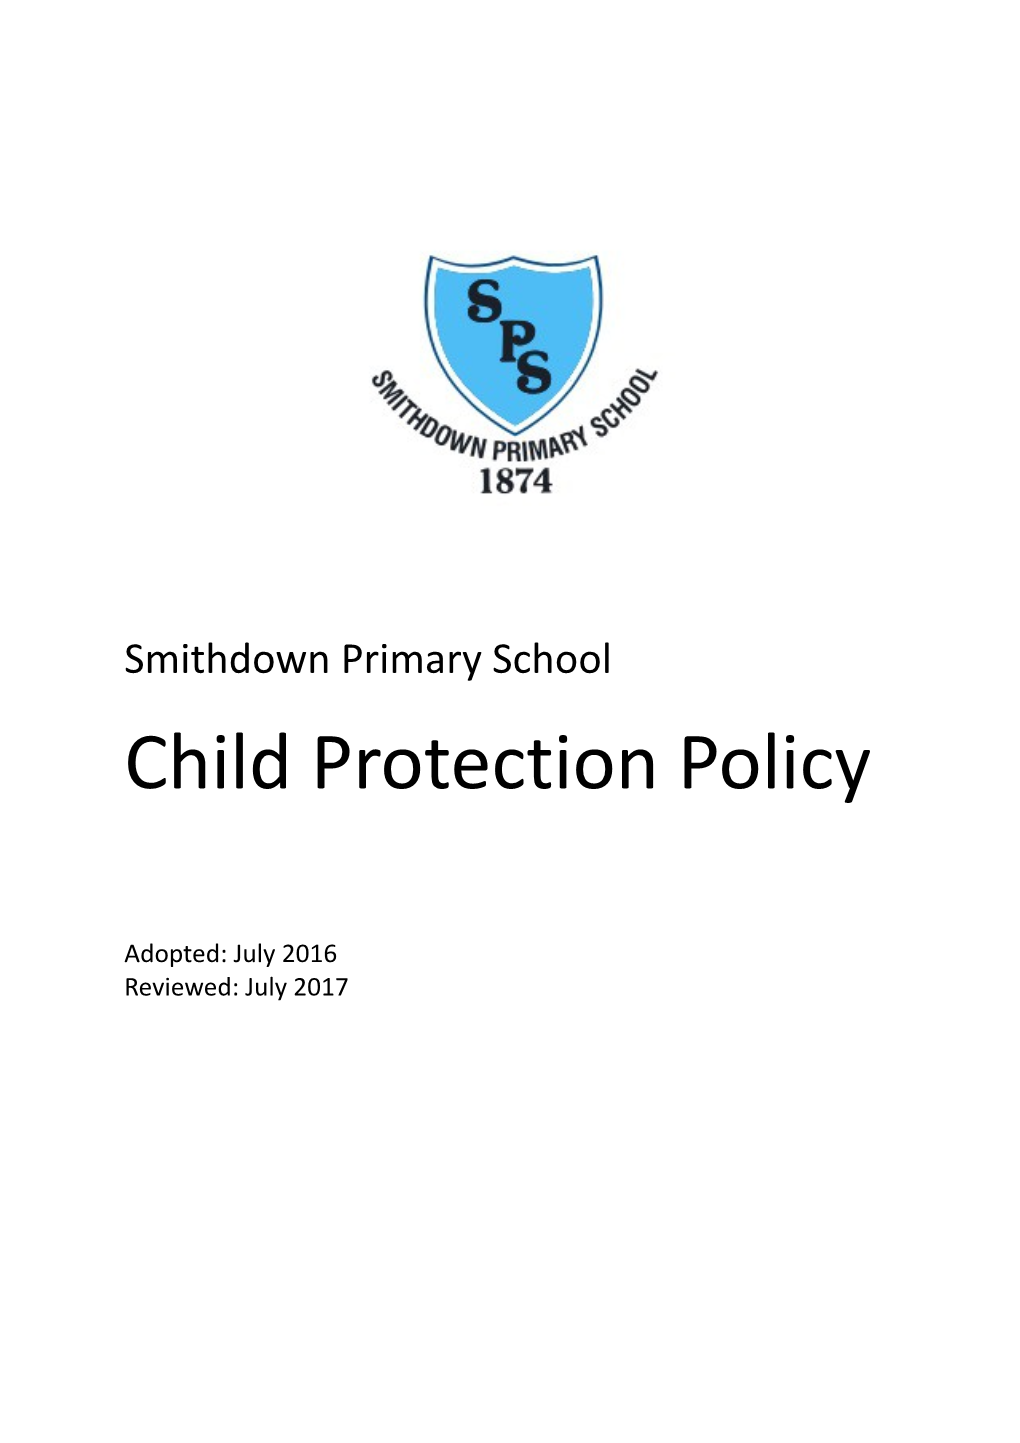 Schools Model Child Protection Policy